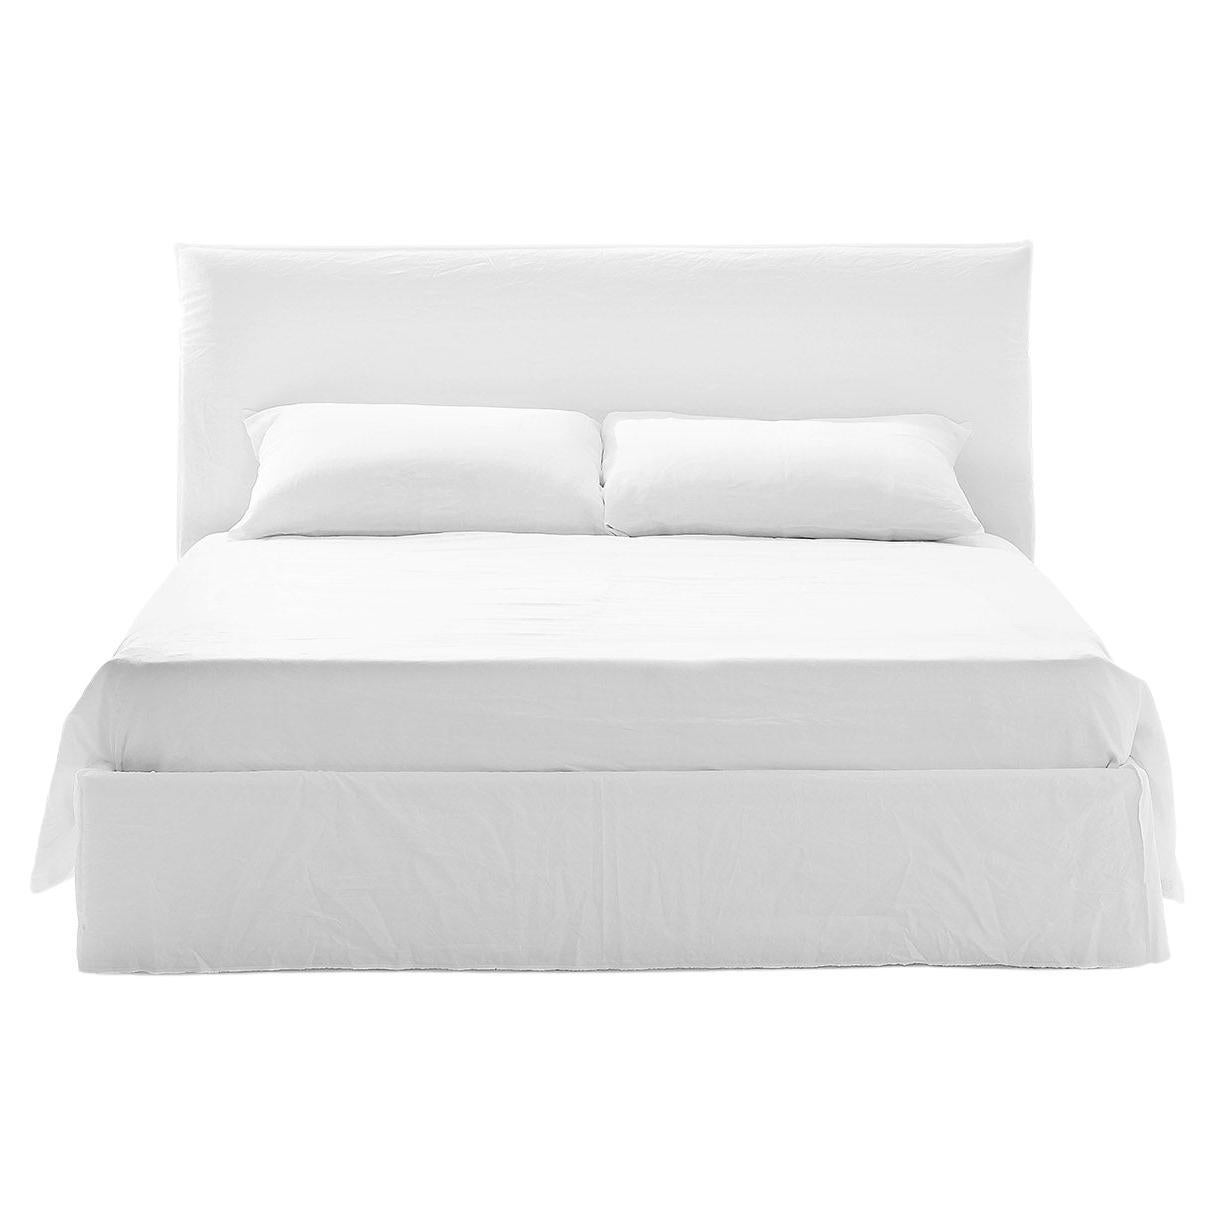 Gervasoni Ghost 80 F Knock Down Bed in White Linen Upholstery by Paola Navone For Sale